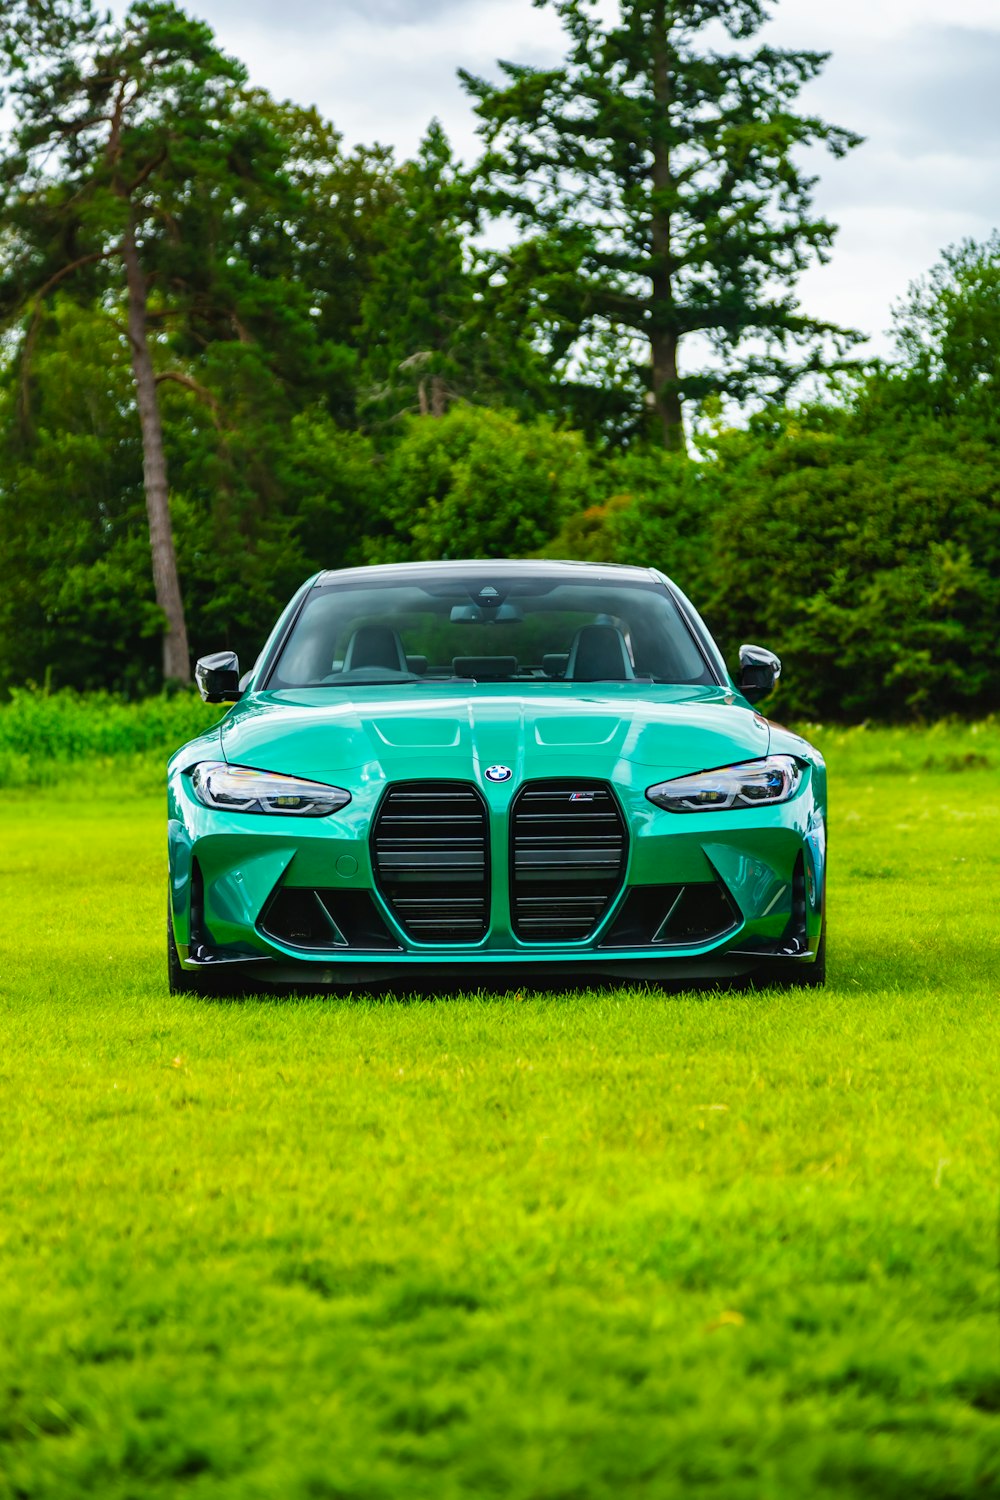 a green sports car parked in a grassy field